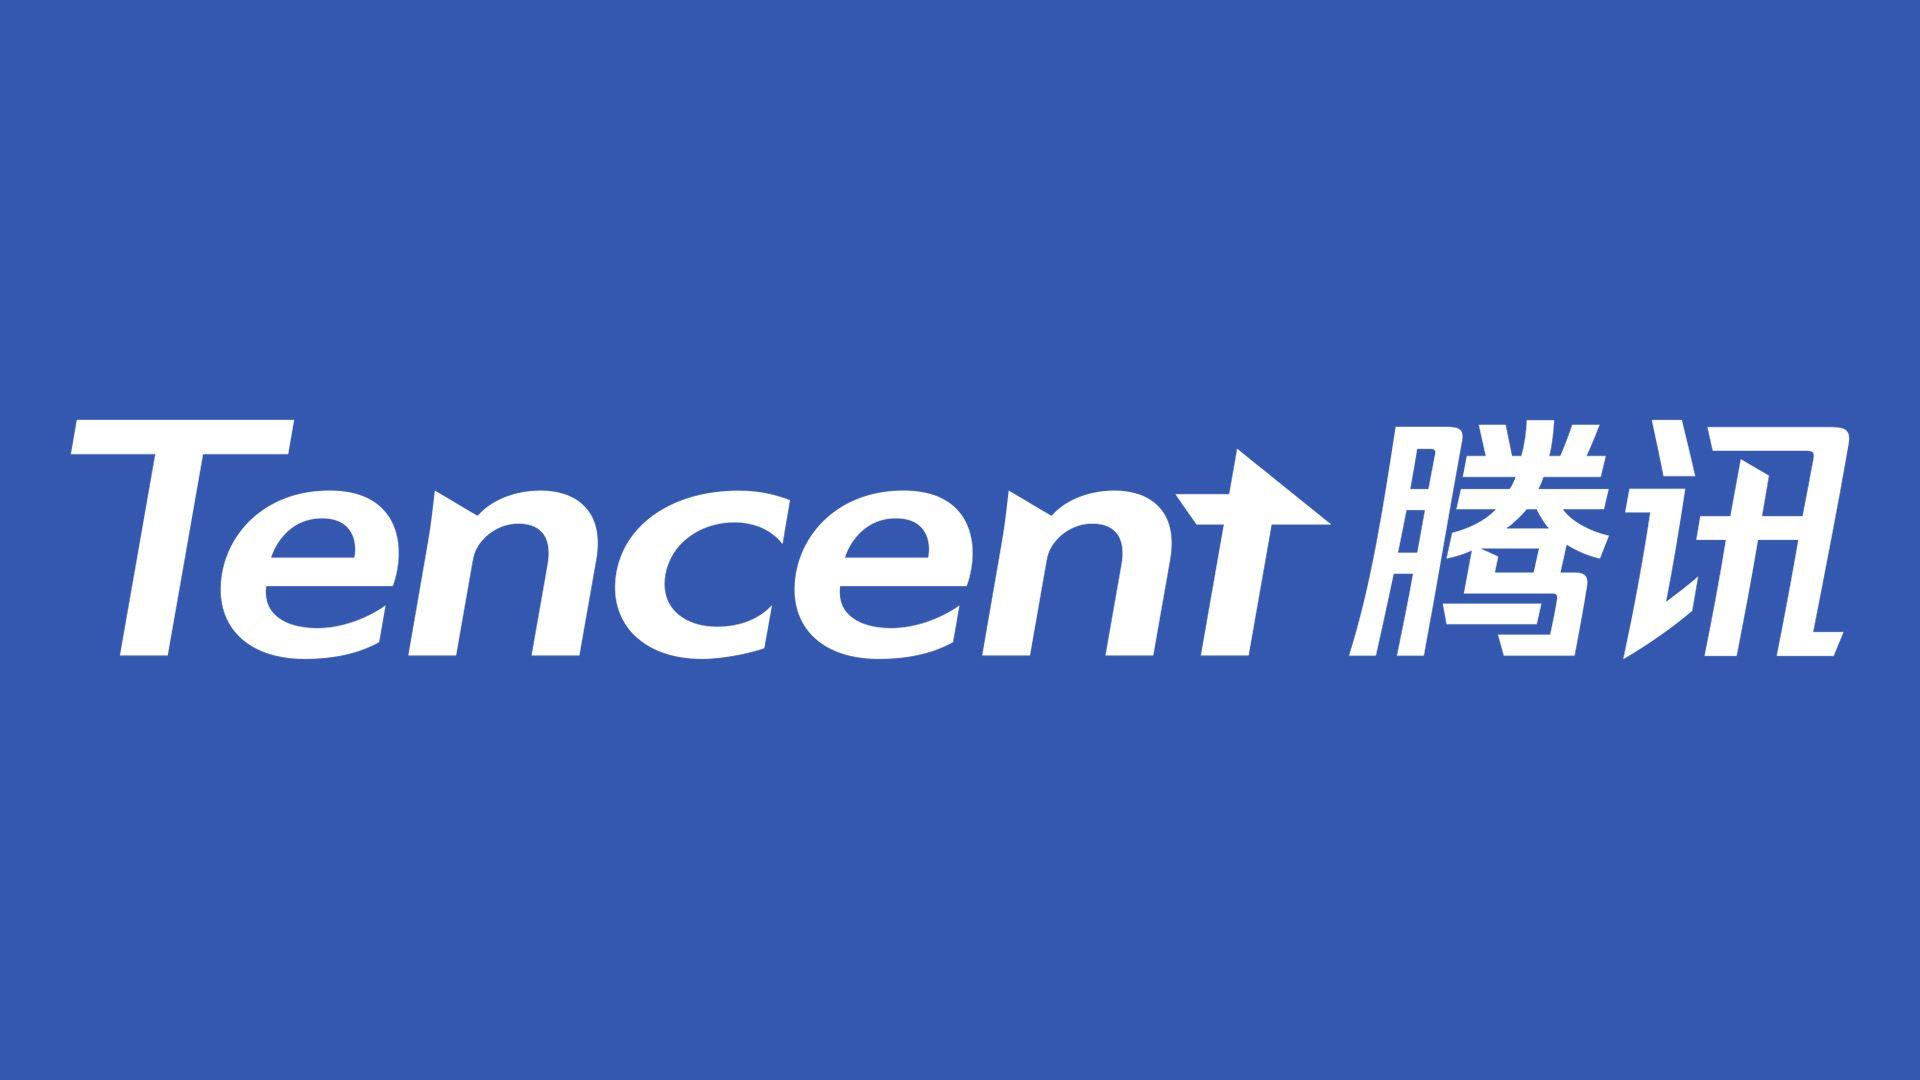 Tecent Logo - Tencent logo, symbol, meaning, History and Evolution